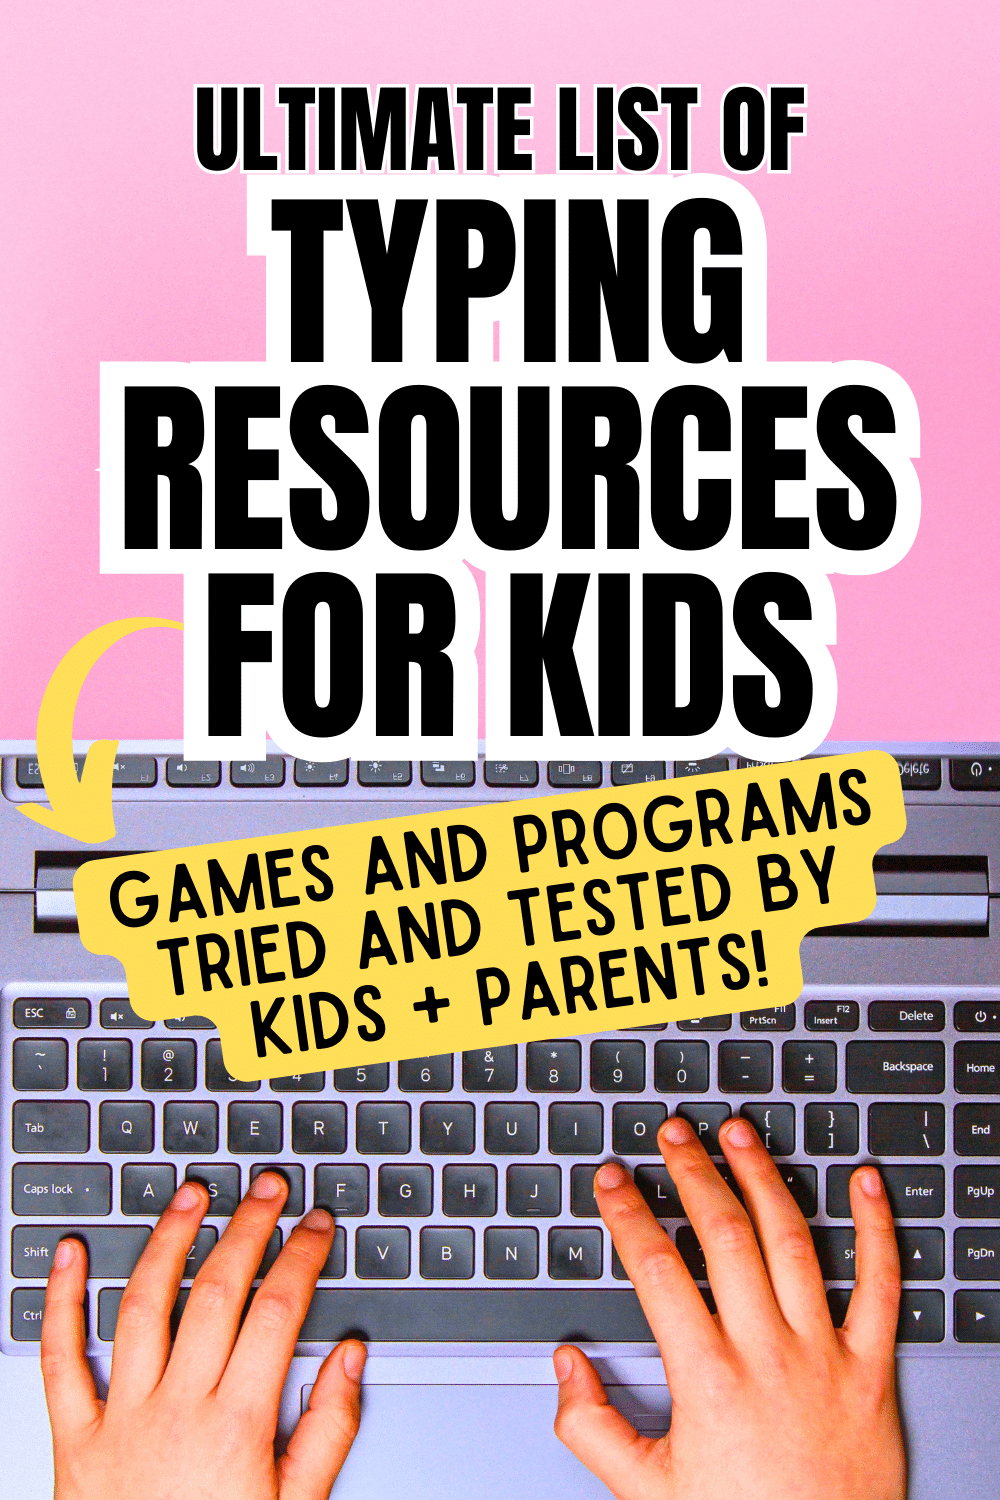 Typing Games For Middle School Keyboard Practice and Elementary Learn To Type (typing for free lessons and free typing games) - learning games for kids keyboard lessons text over hands of kids typing in game